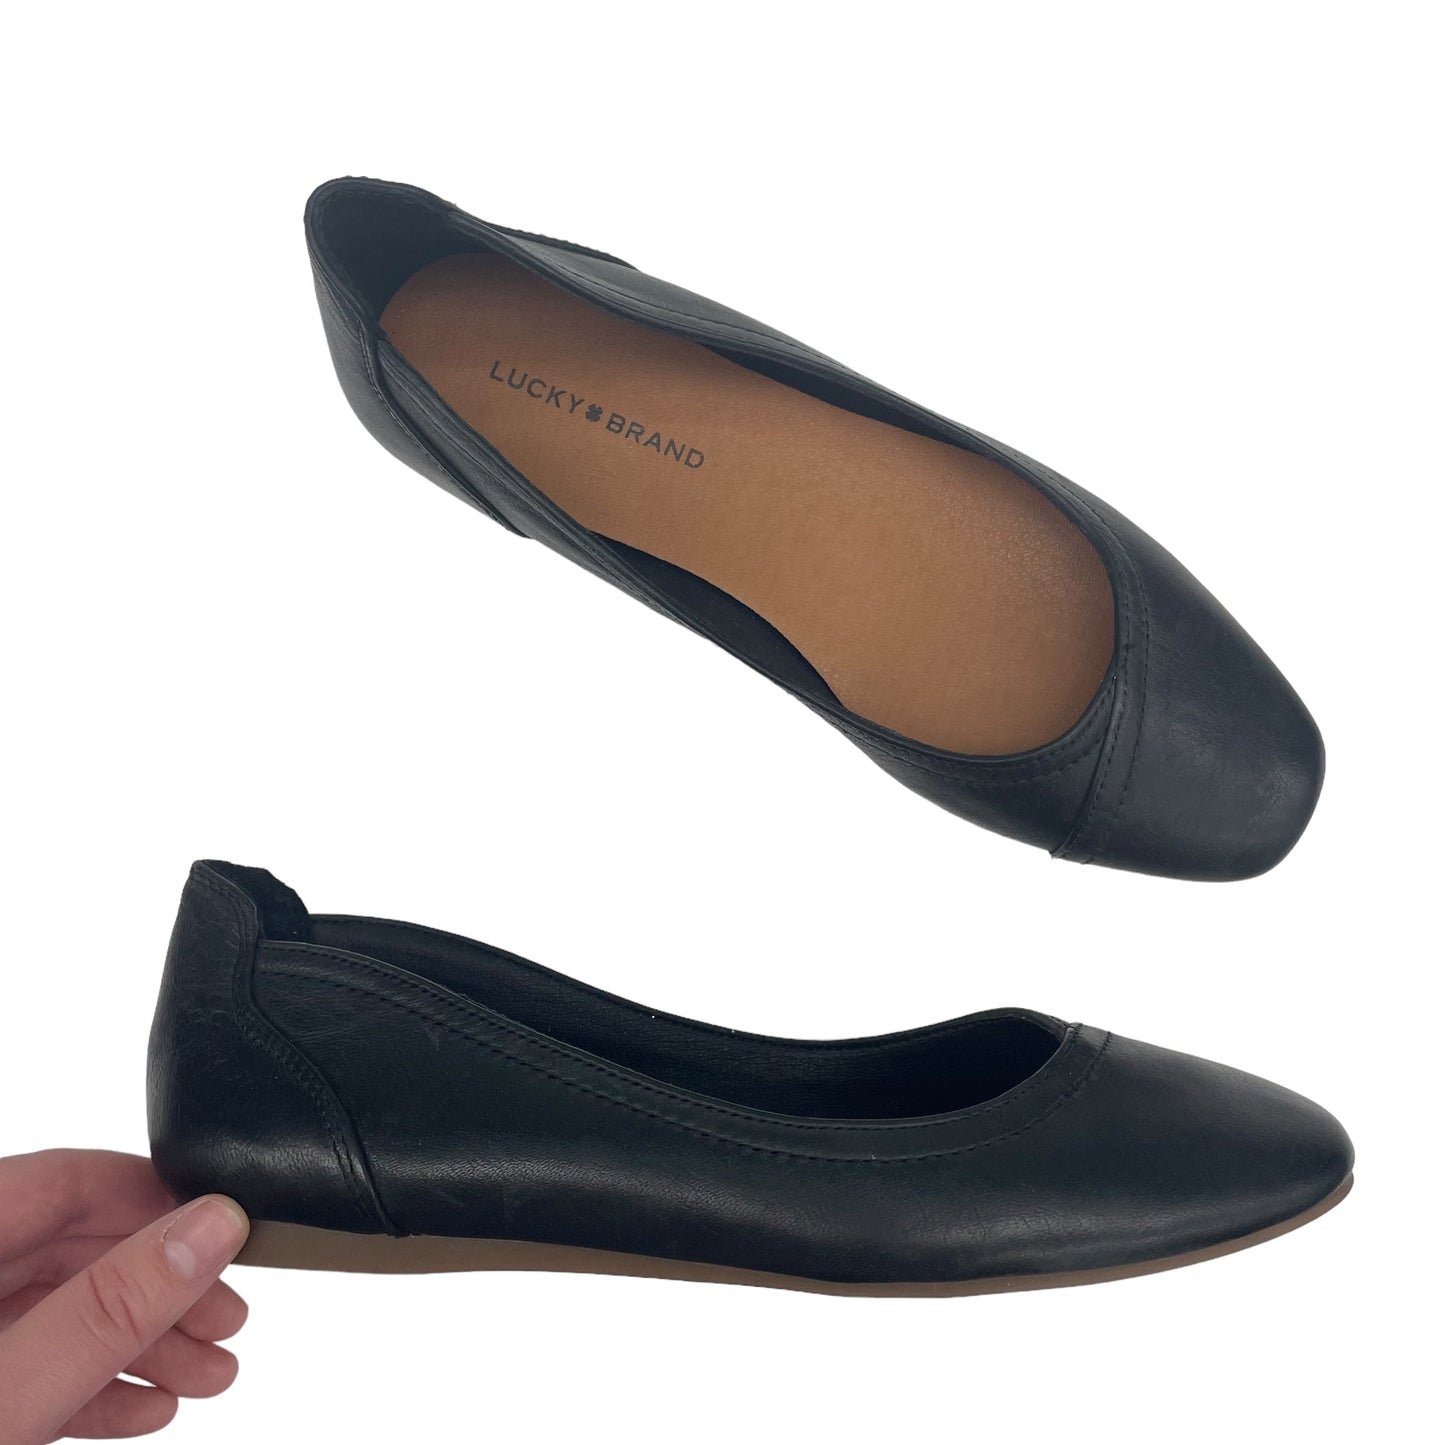 Black Shoes Flats Lucky Brand, Size 6.5